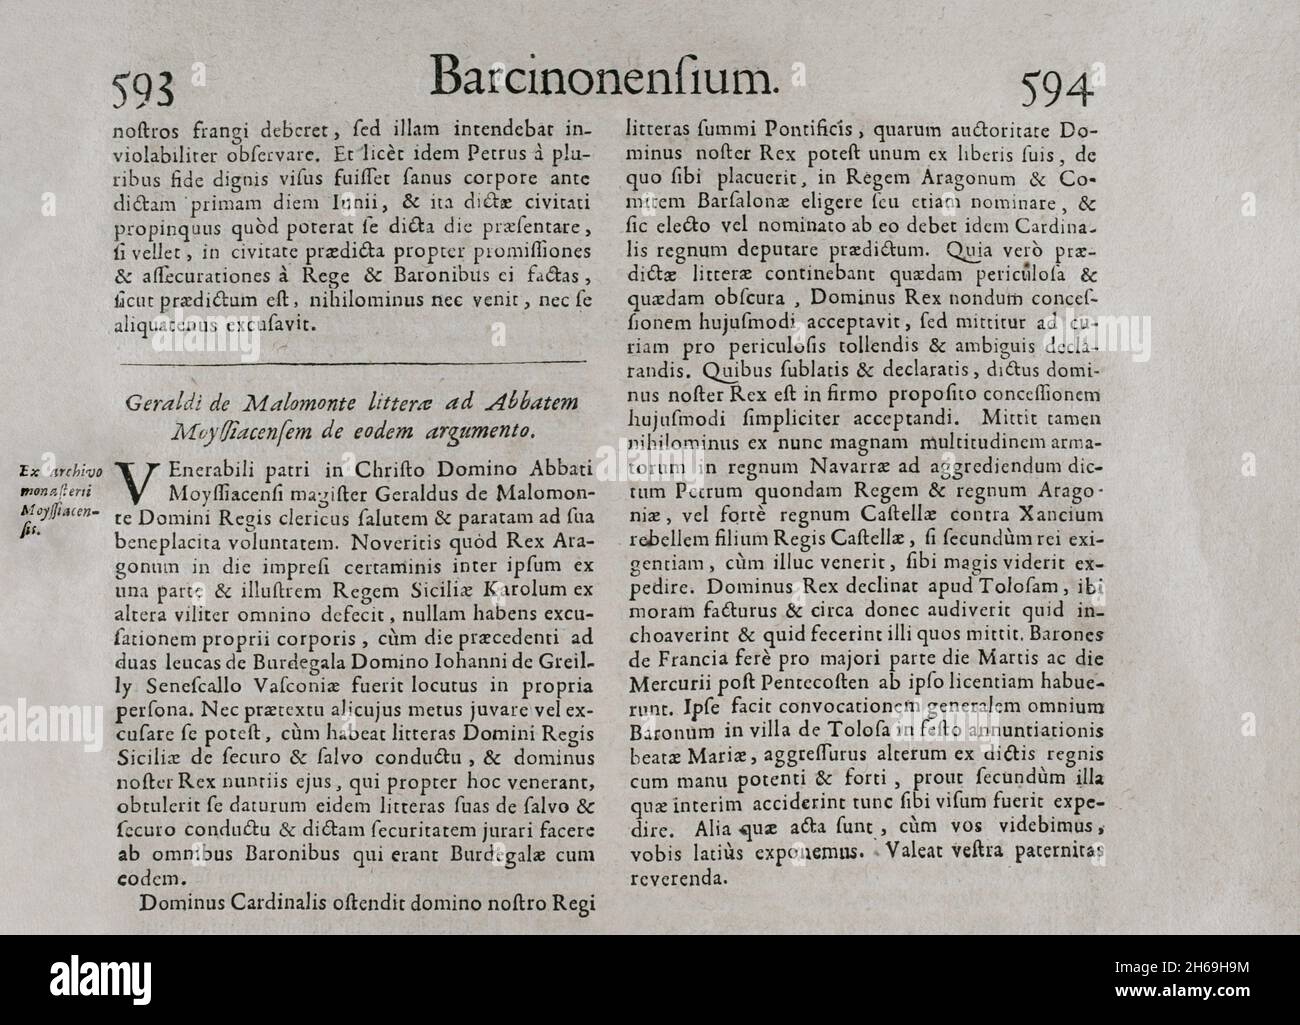 Barcinonensium. 'Marca Hispanica sive limes hispanicus'. Book written in Latin by Pierre de Marca (1594-1662). In 1656 he was commissioned to formalise the border treaty between the kingdoms of France and Spain, a task that was reflected in this collection of five books, making the French people aware of the annexed province of Catalonia in 1641. Etienne Baluze enlarged and edited it. Published in Paris by François Muguet in 1688. Historical Military Library of Barcelona. Catalonia, Spain. Stock Photo